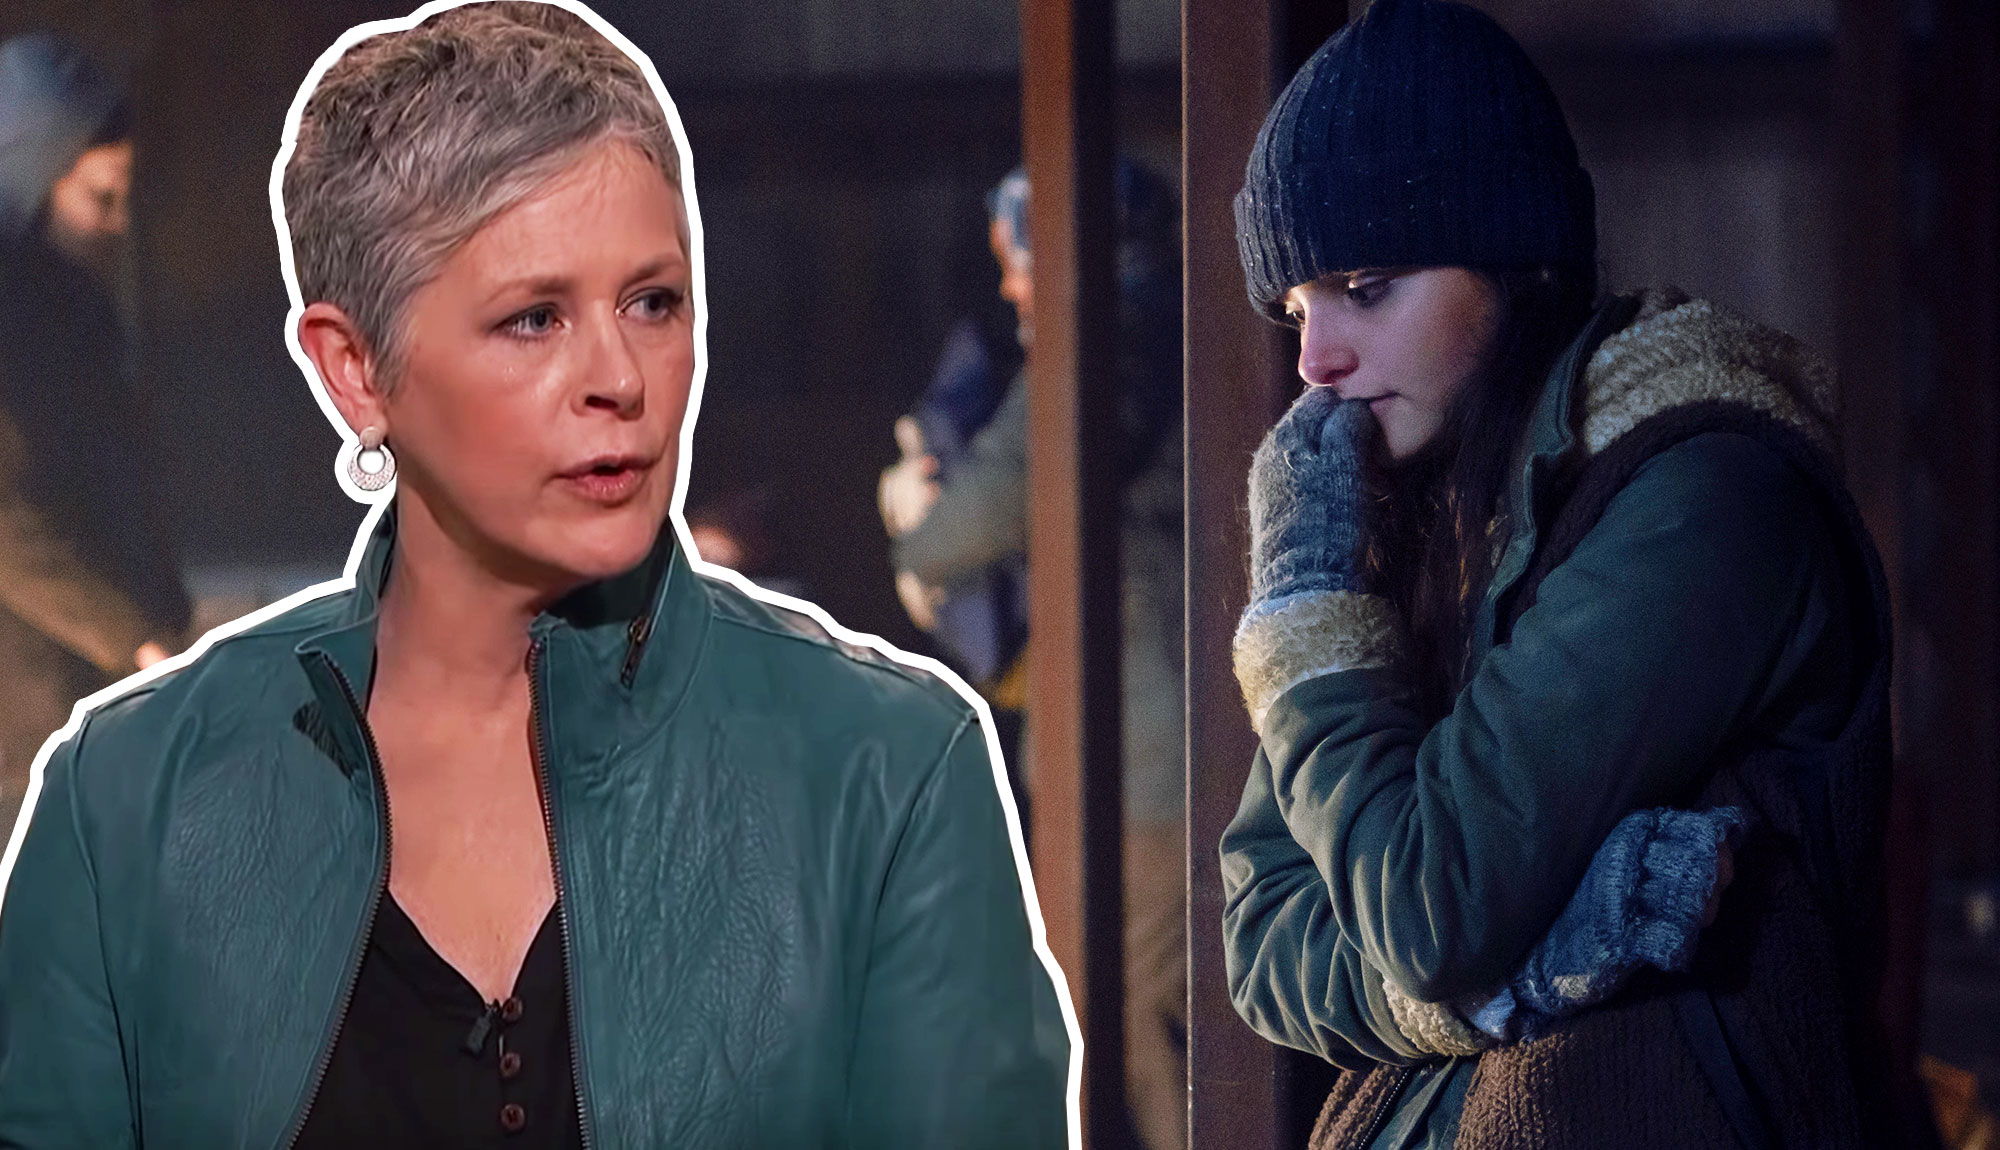 TWD’S MELISSA MCBRIDE EXPLAINS WHY CAROL HAD TO SAVE LYDIA IN THE WALKING DEAD